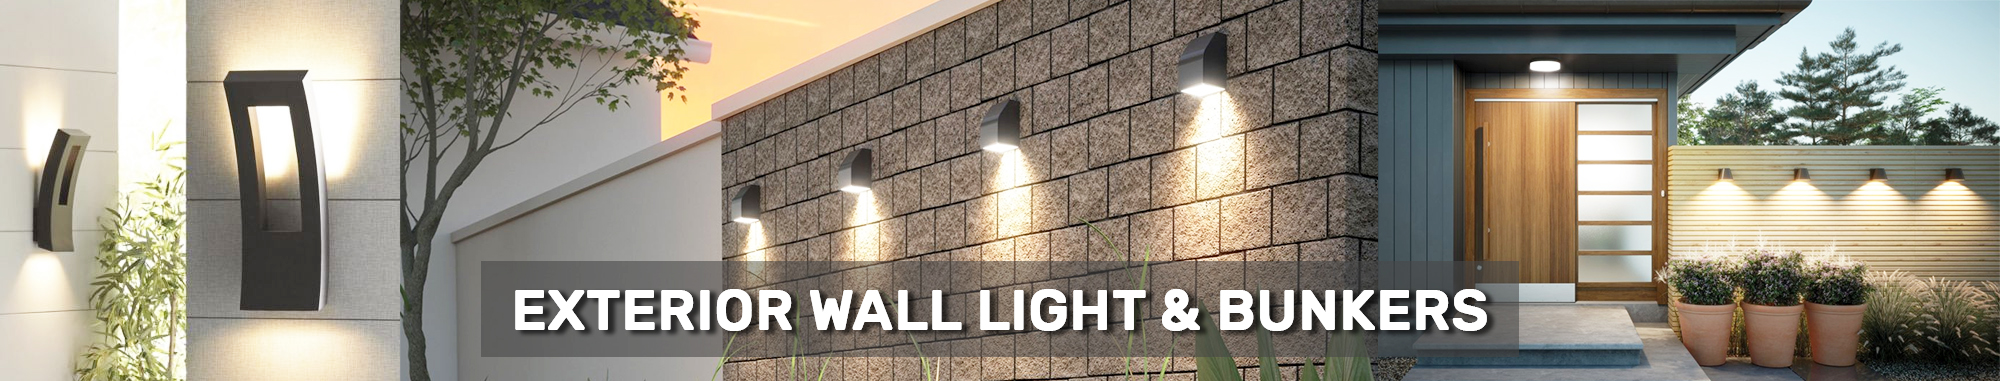 Exterior Wall Light & Bunkers